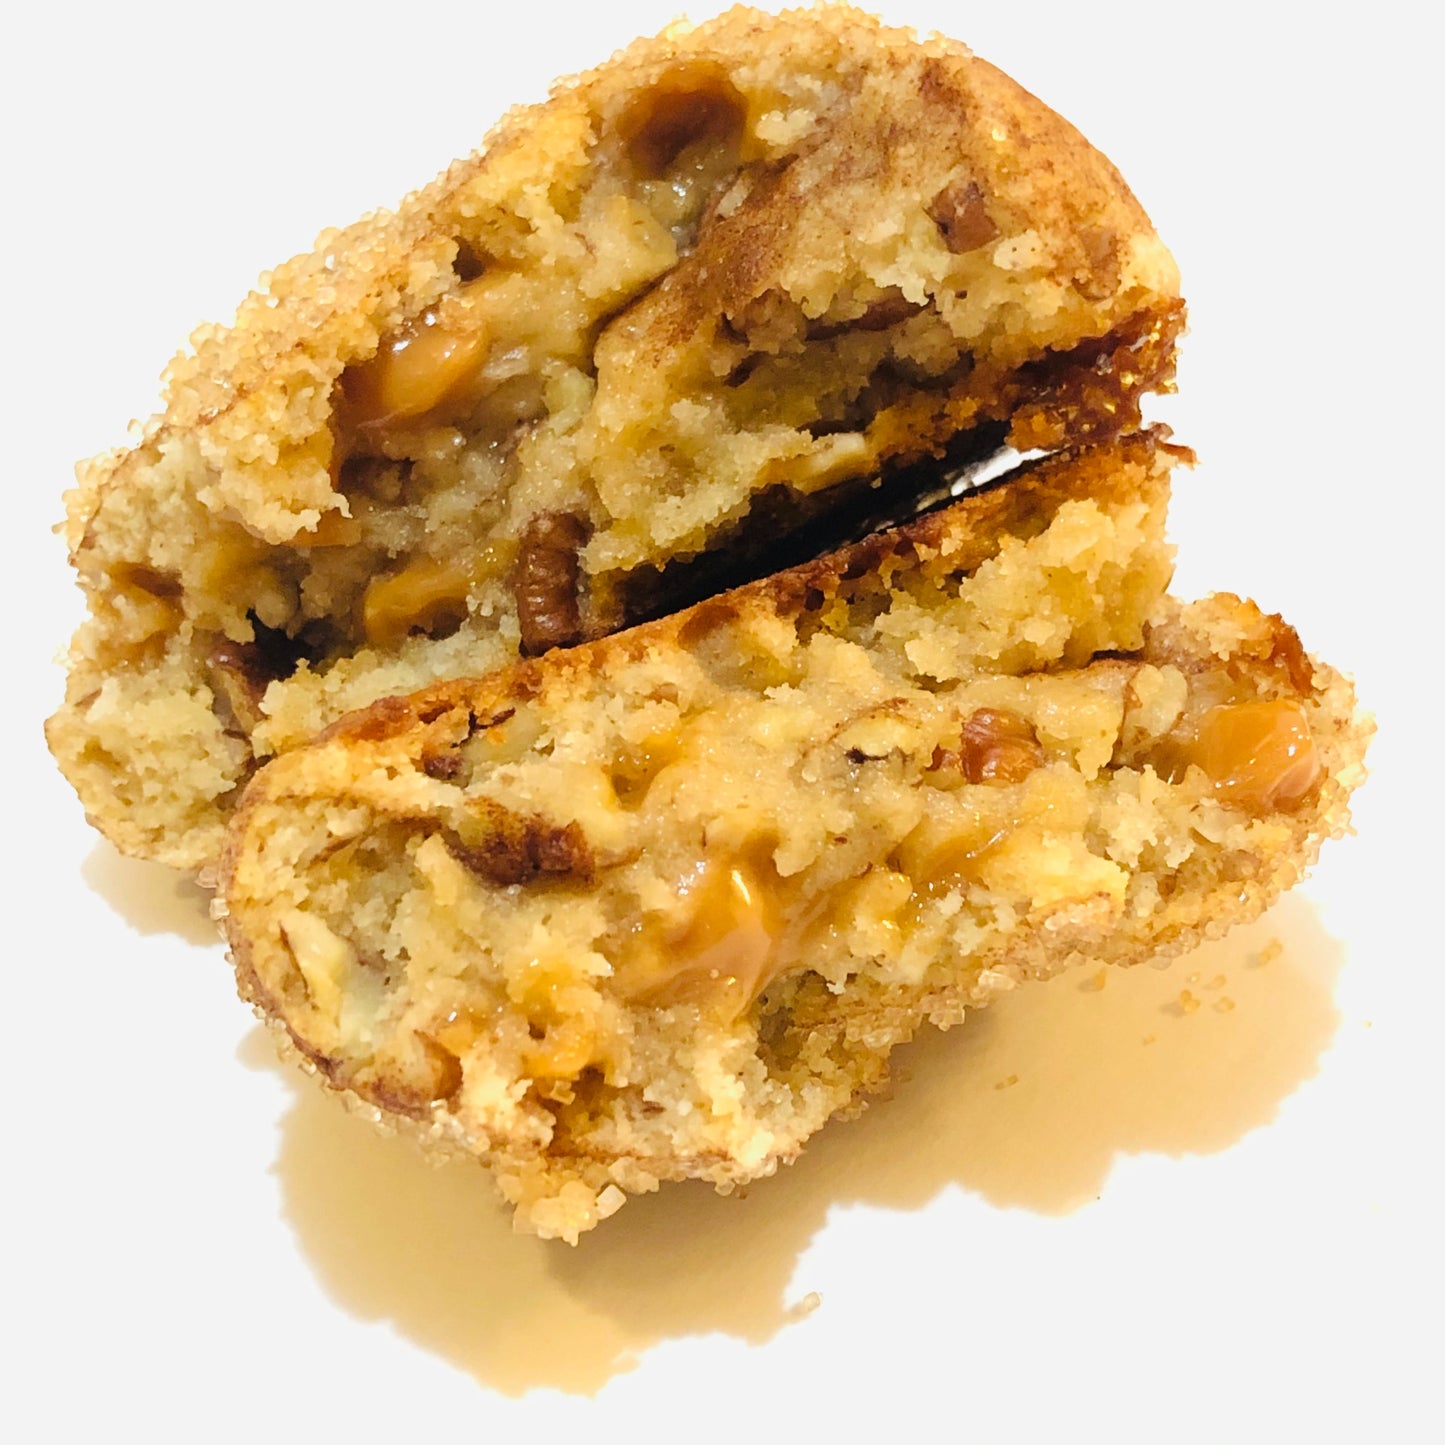 Snicker Doodle with Caramel Bits and Pecans